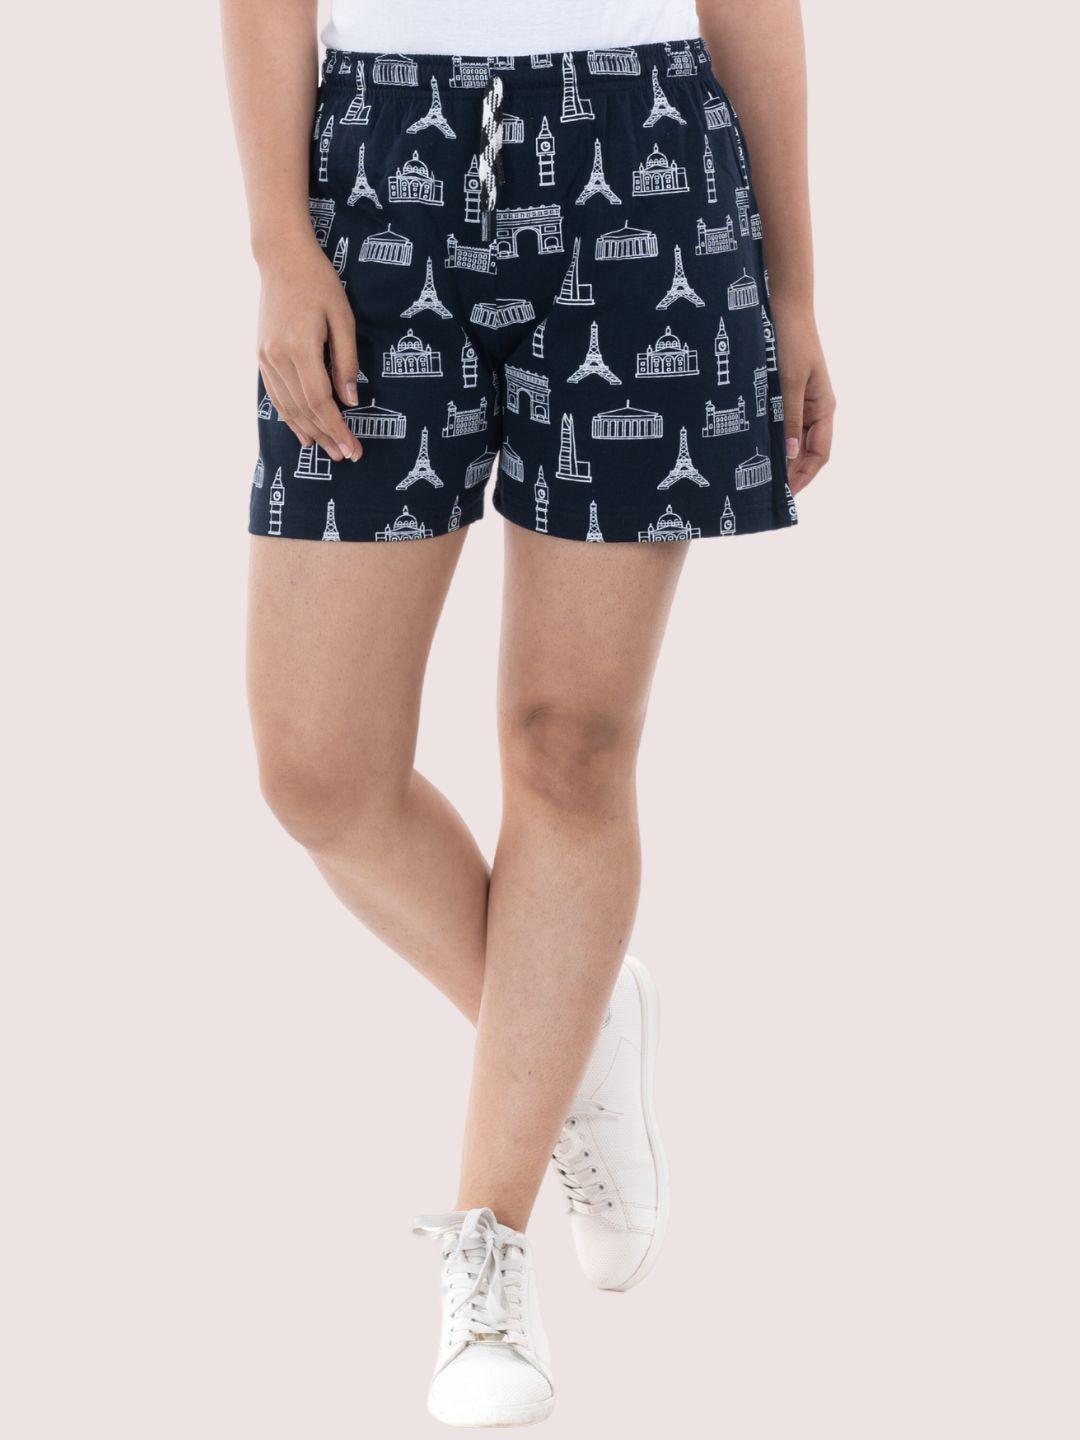 styleaone women mid-rise conversational printed shorts